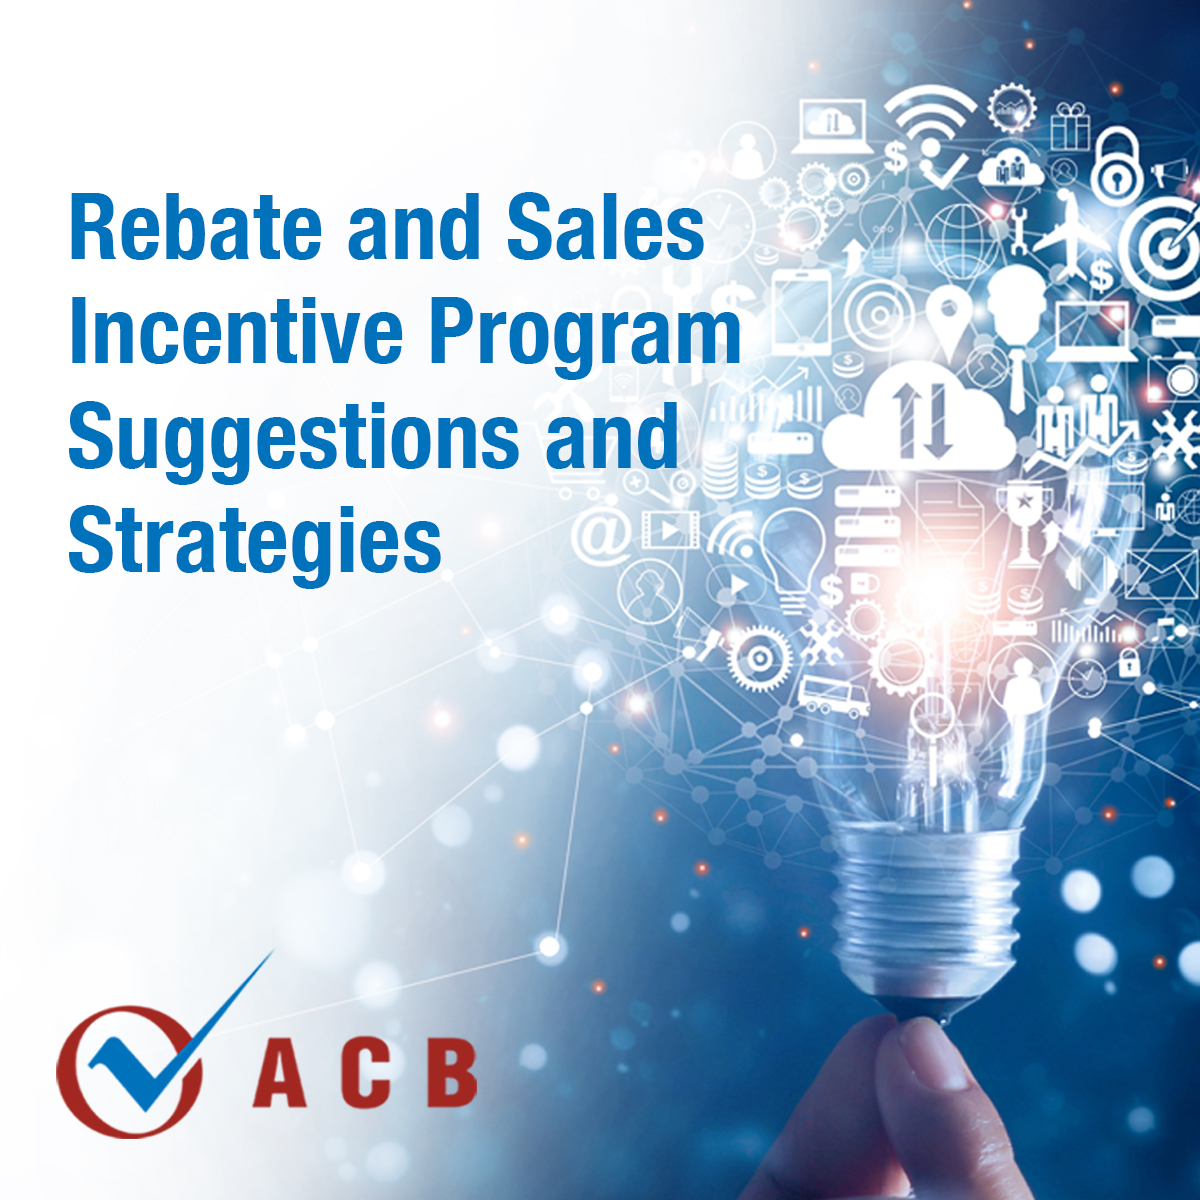 acb-s-study-finds-manufacturers-quickly-adjusted-rebate-and-sales